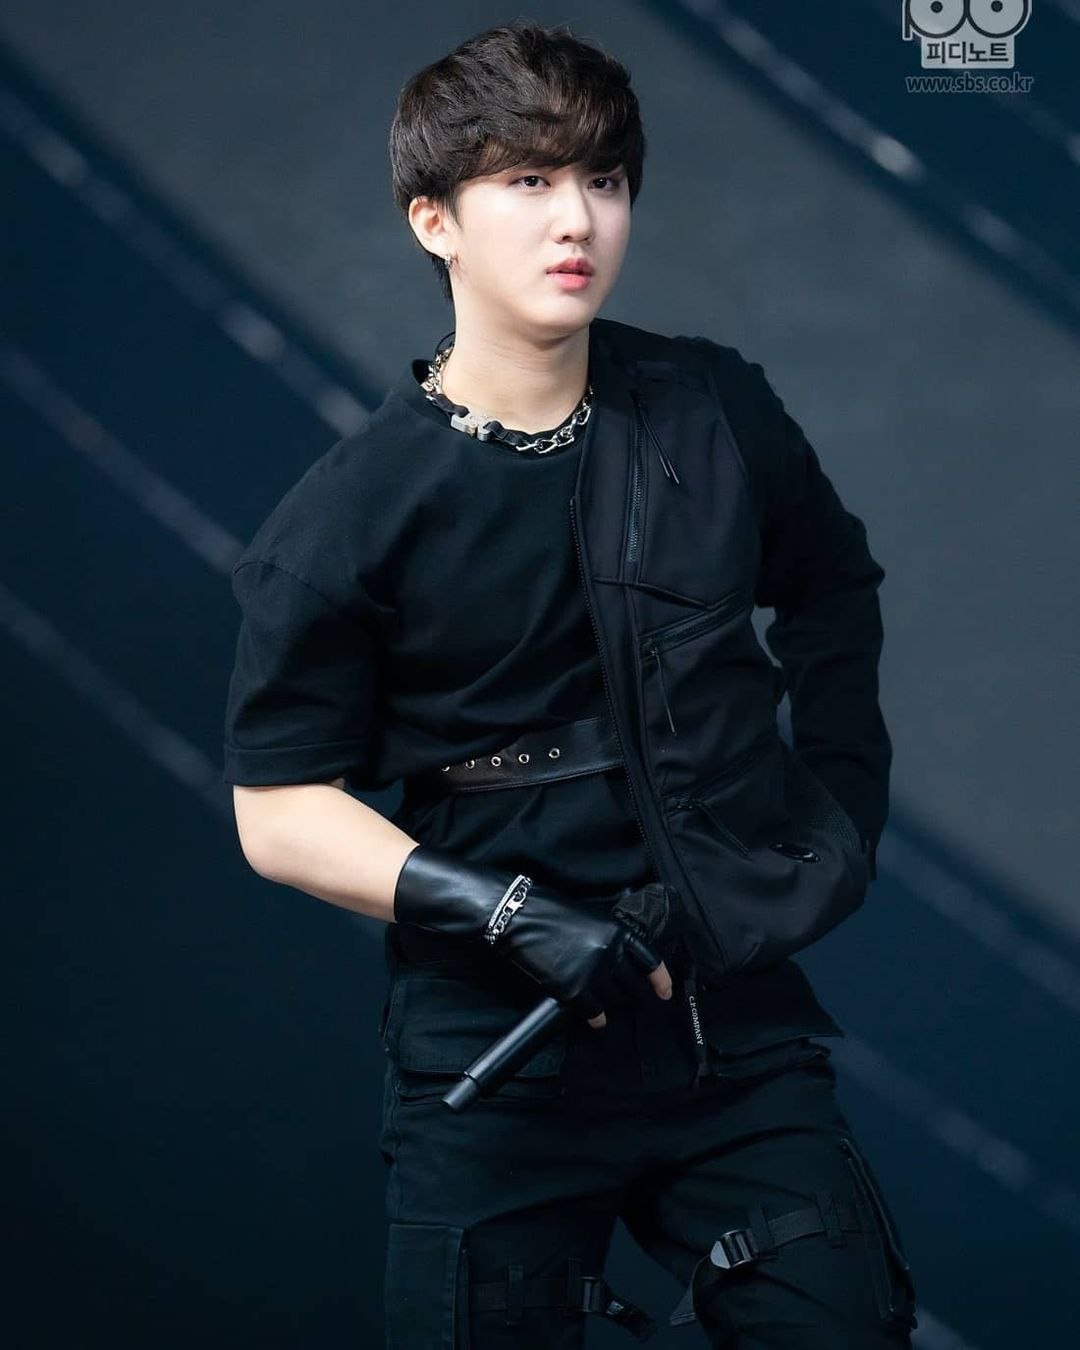 Changbin Stray Kids - Biography, Profile, Facts, and Career